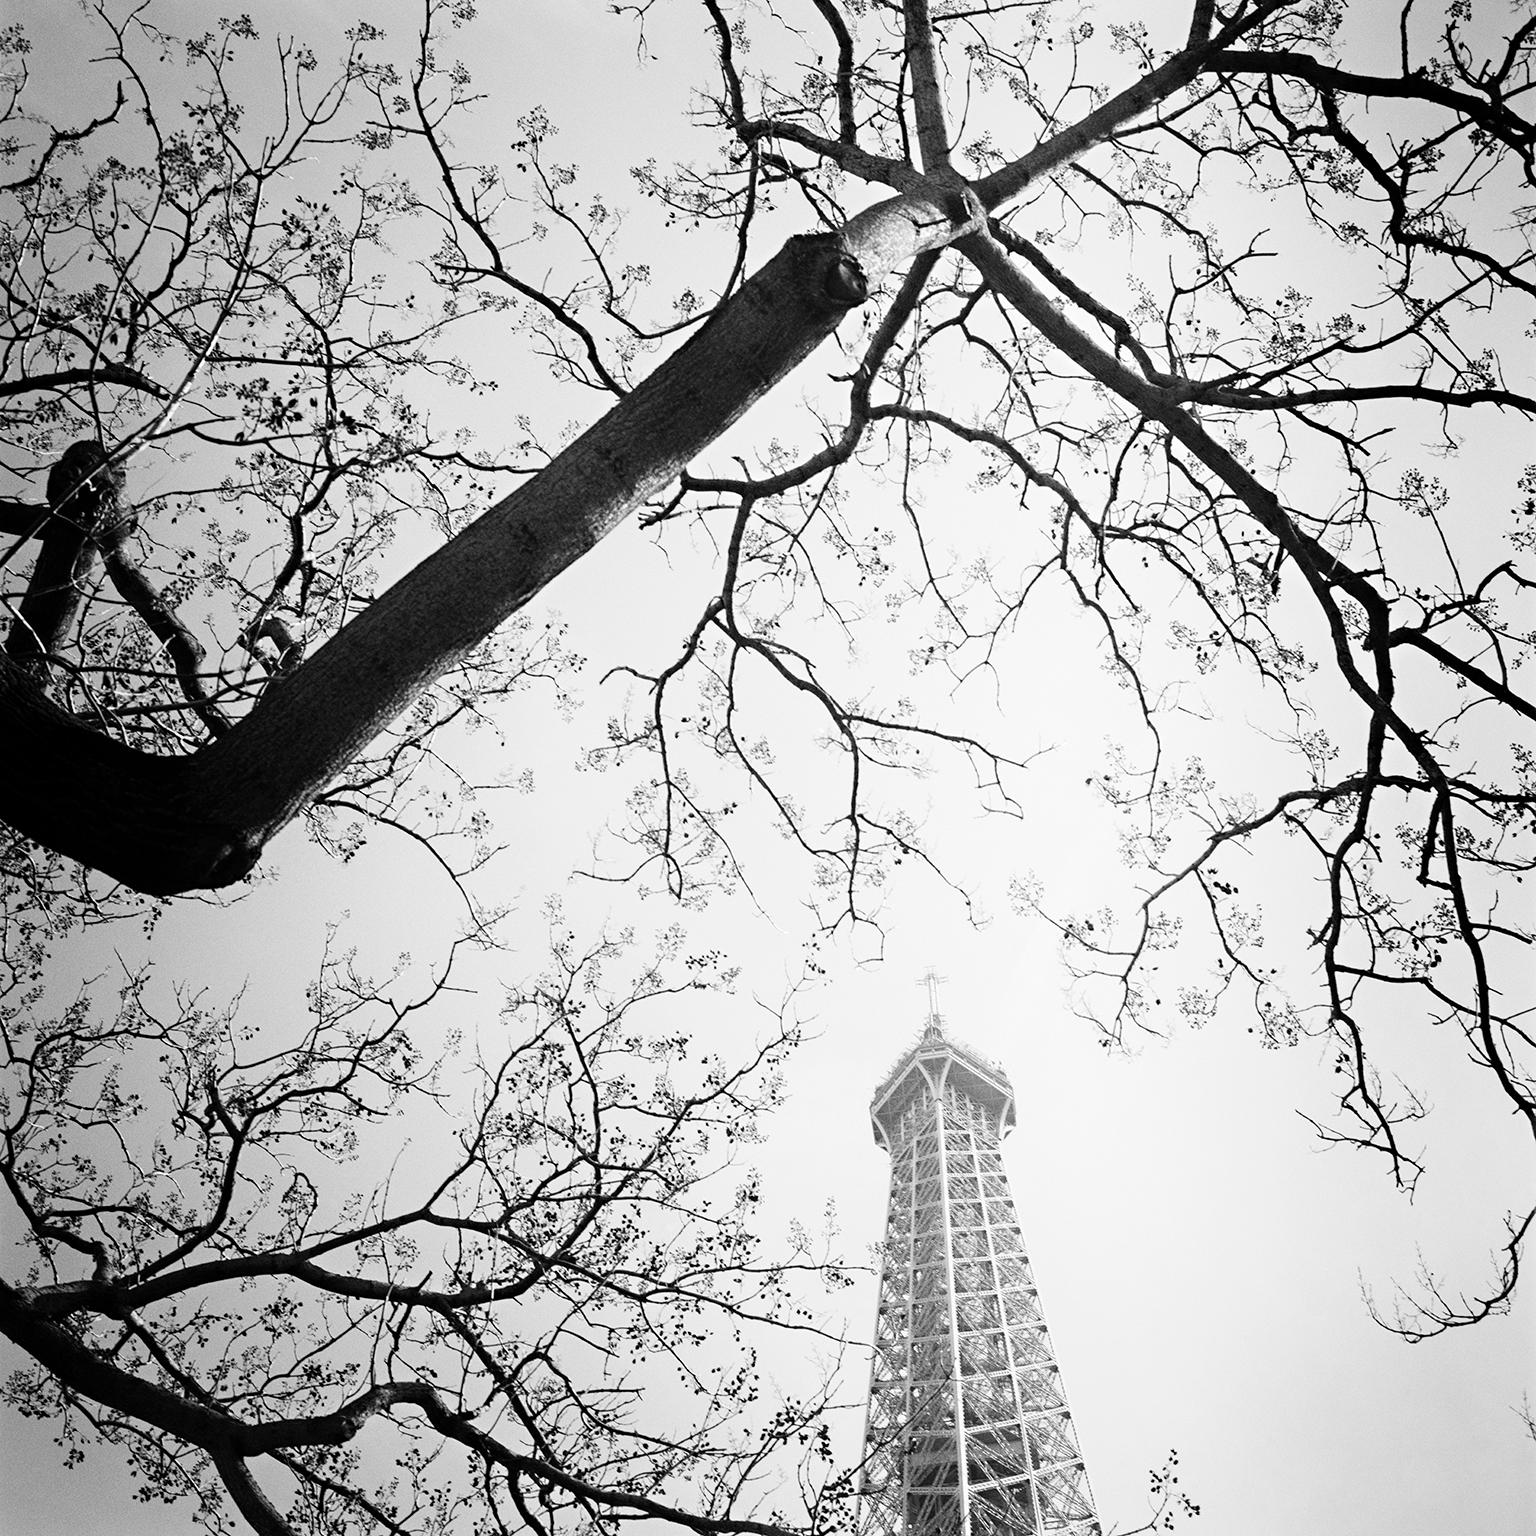 Gerald Berghammer, Ina Forstinger Landscape Photograph - Tree and the Tower, Paris, France, black and white art photography, landscape